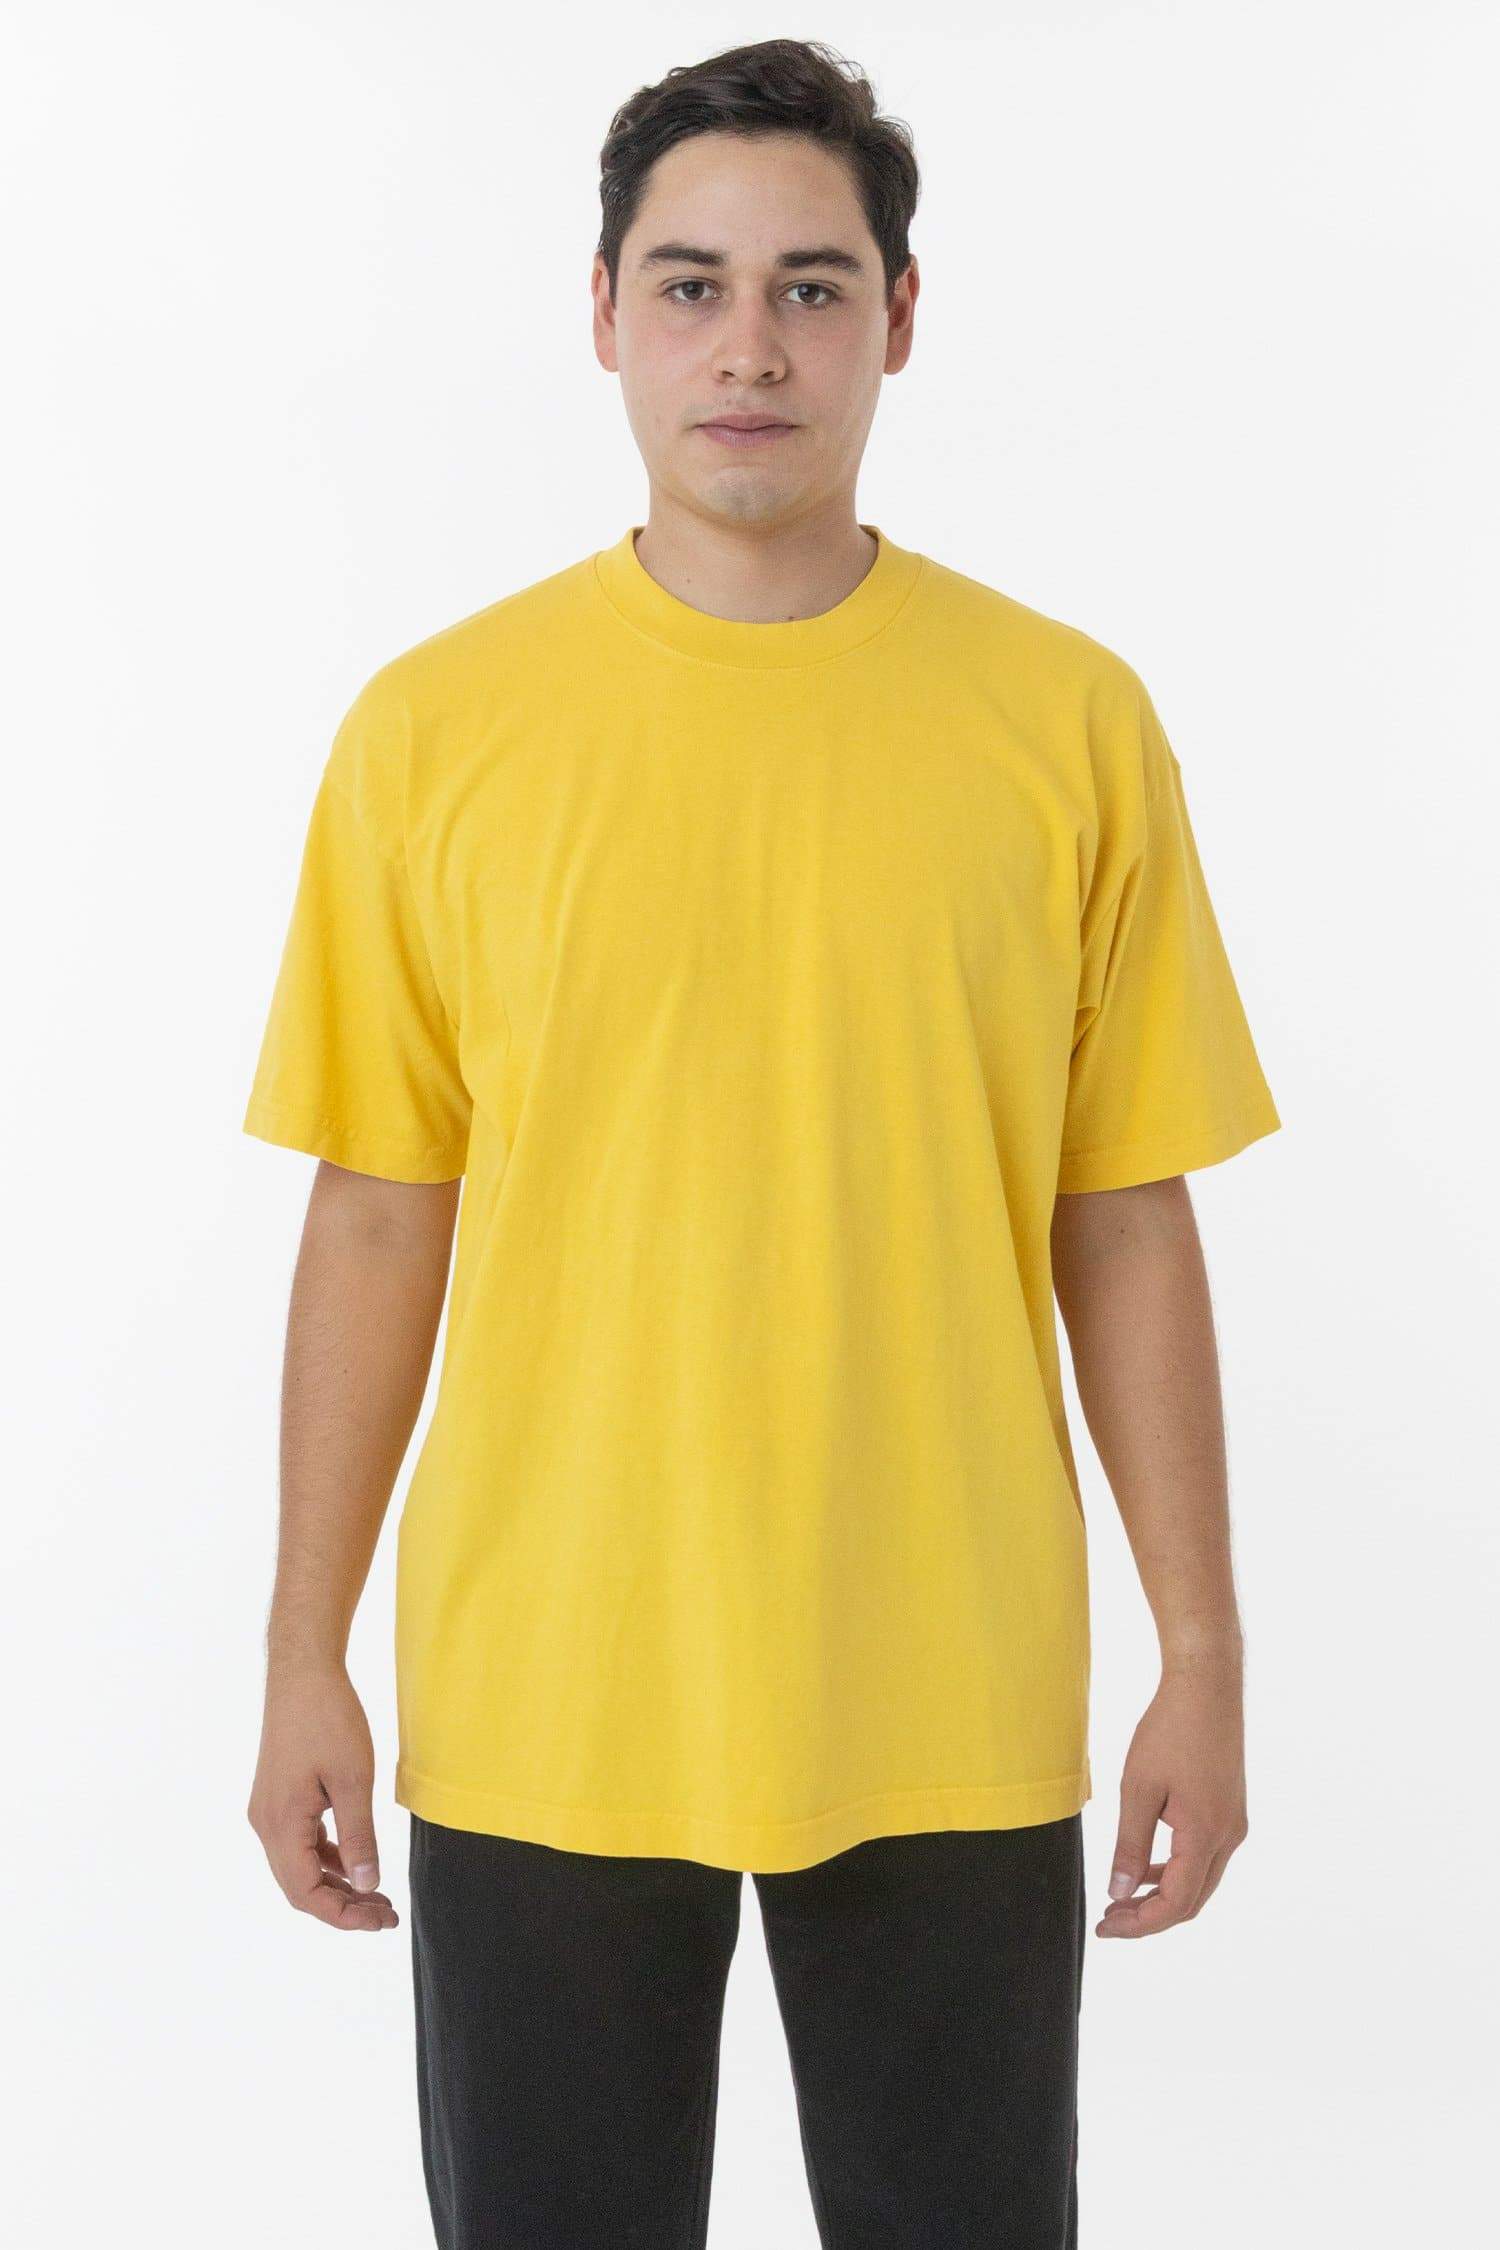 Los Angeles Apparel | The 1801 | Short Sleeve Shirt in Spectra Yellow, Size Medium | Crew Neck